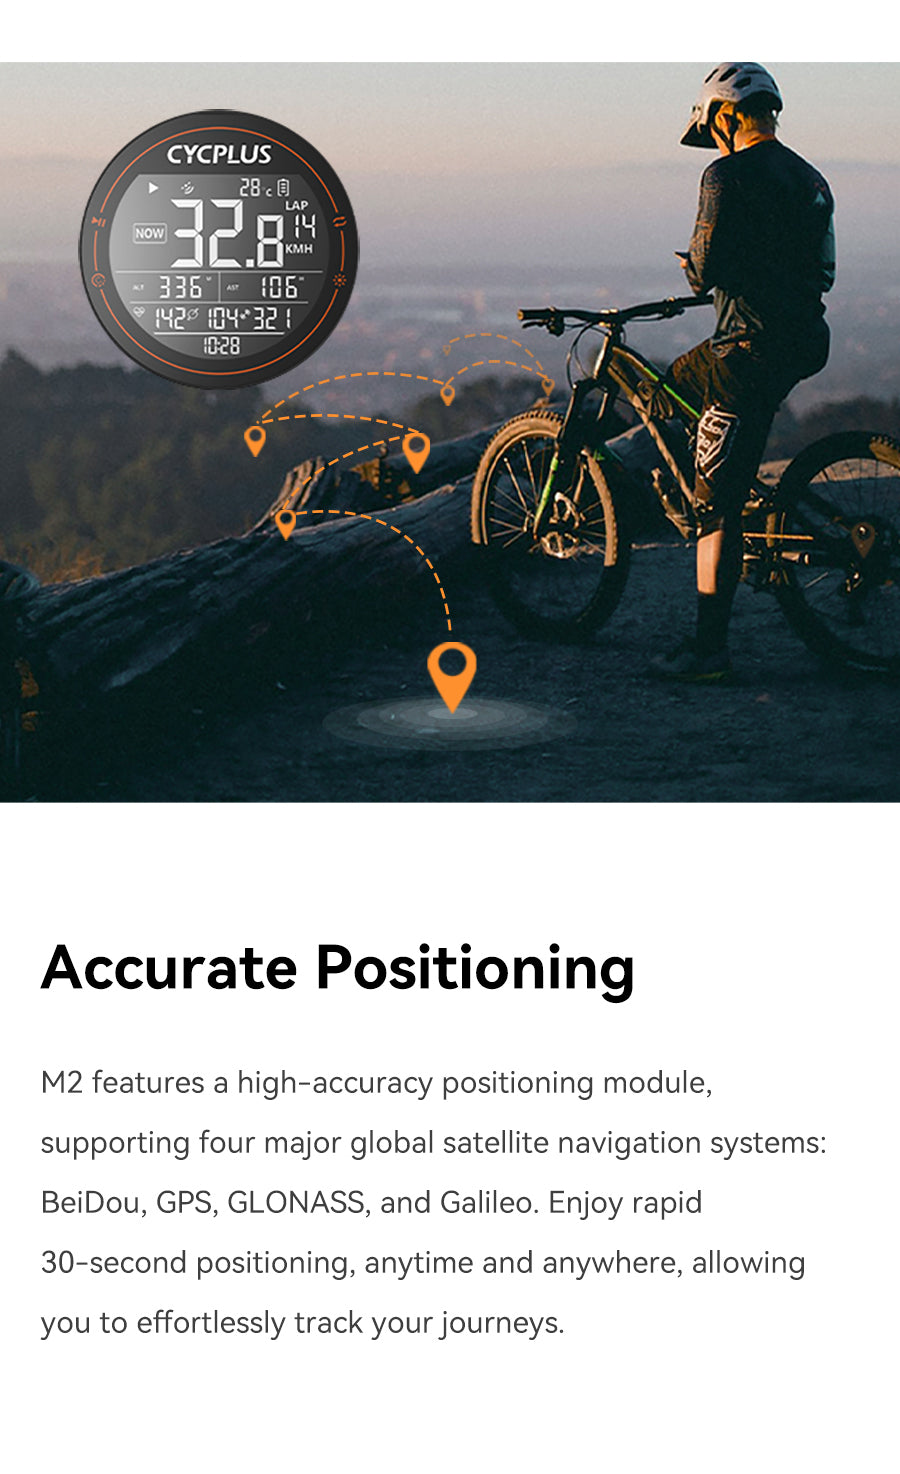 Accurate Positioning  M2 features a high-accuracy positioning module, supporting four major global satellite navigation systems: BeiDou, GPS, GLONASS, and Galileo. Enjoy rapid 30-second positioning, anytime and anywhere, allowing you to effortlessly track your journeys.